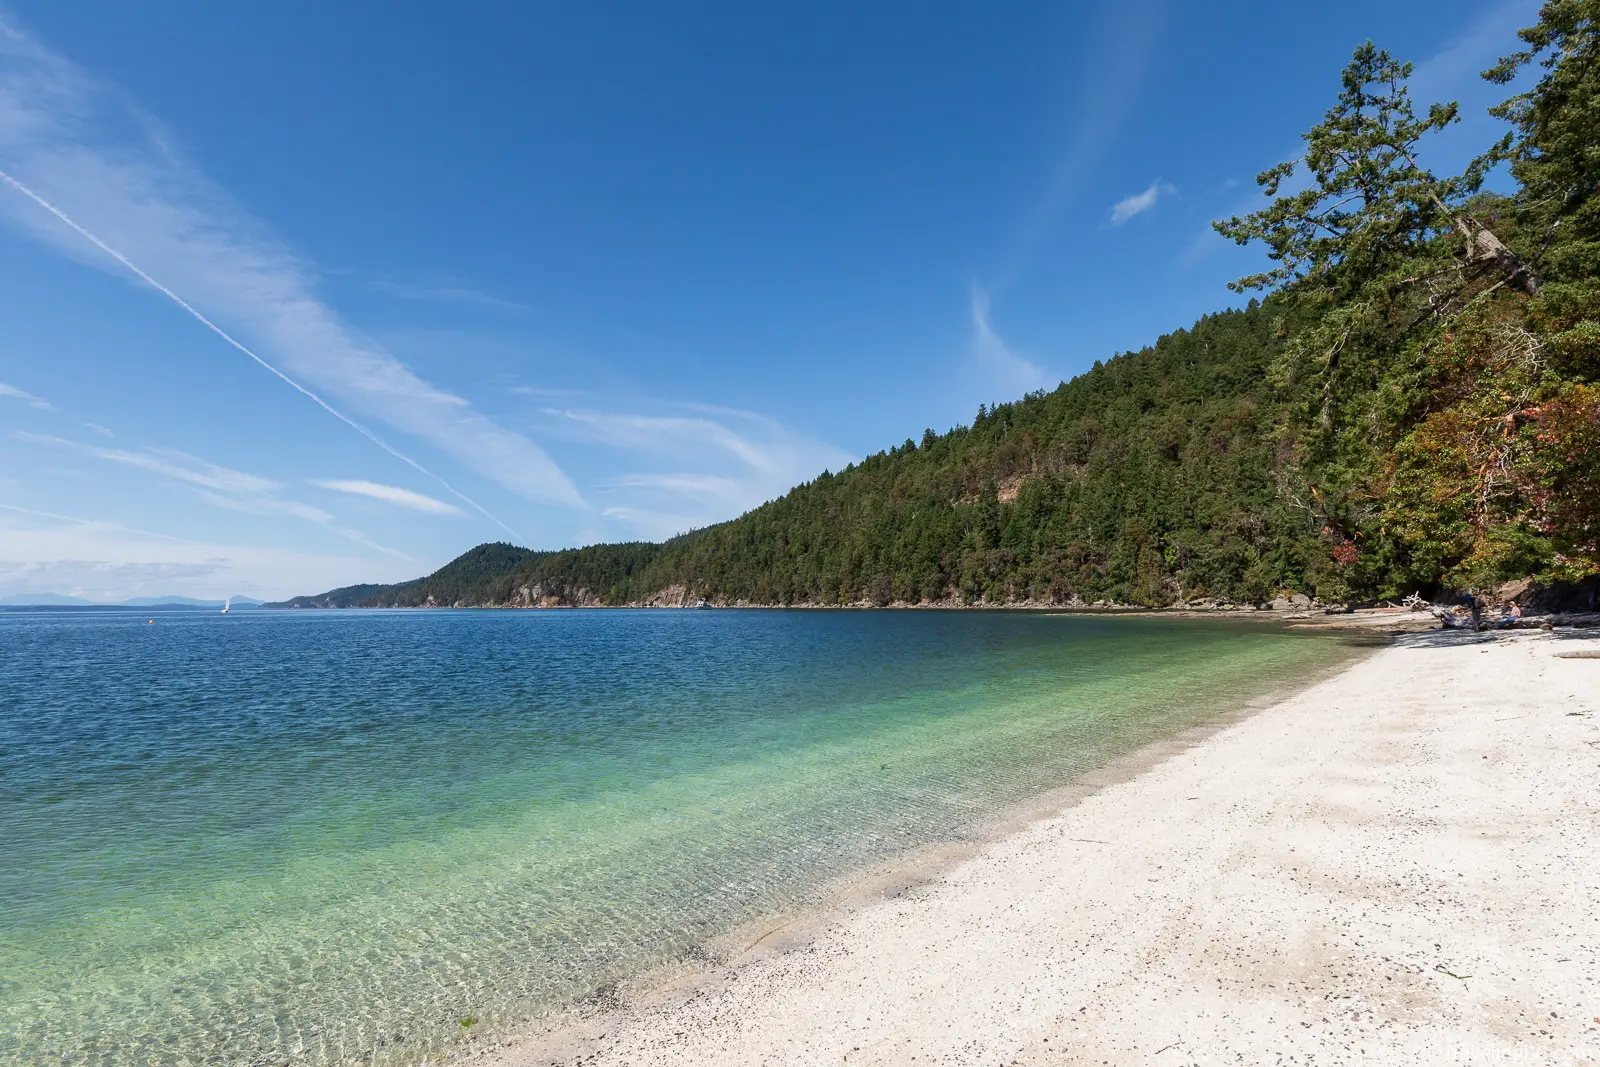 The white shell beach of Montague Harbour Marine Provincial Park